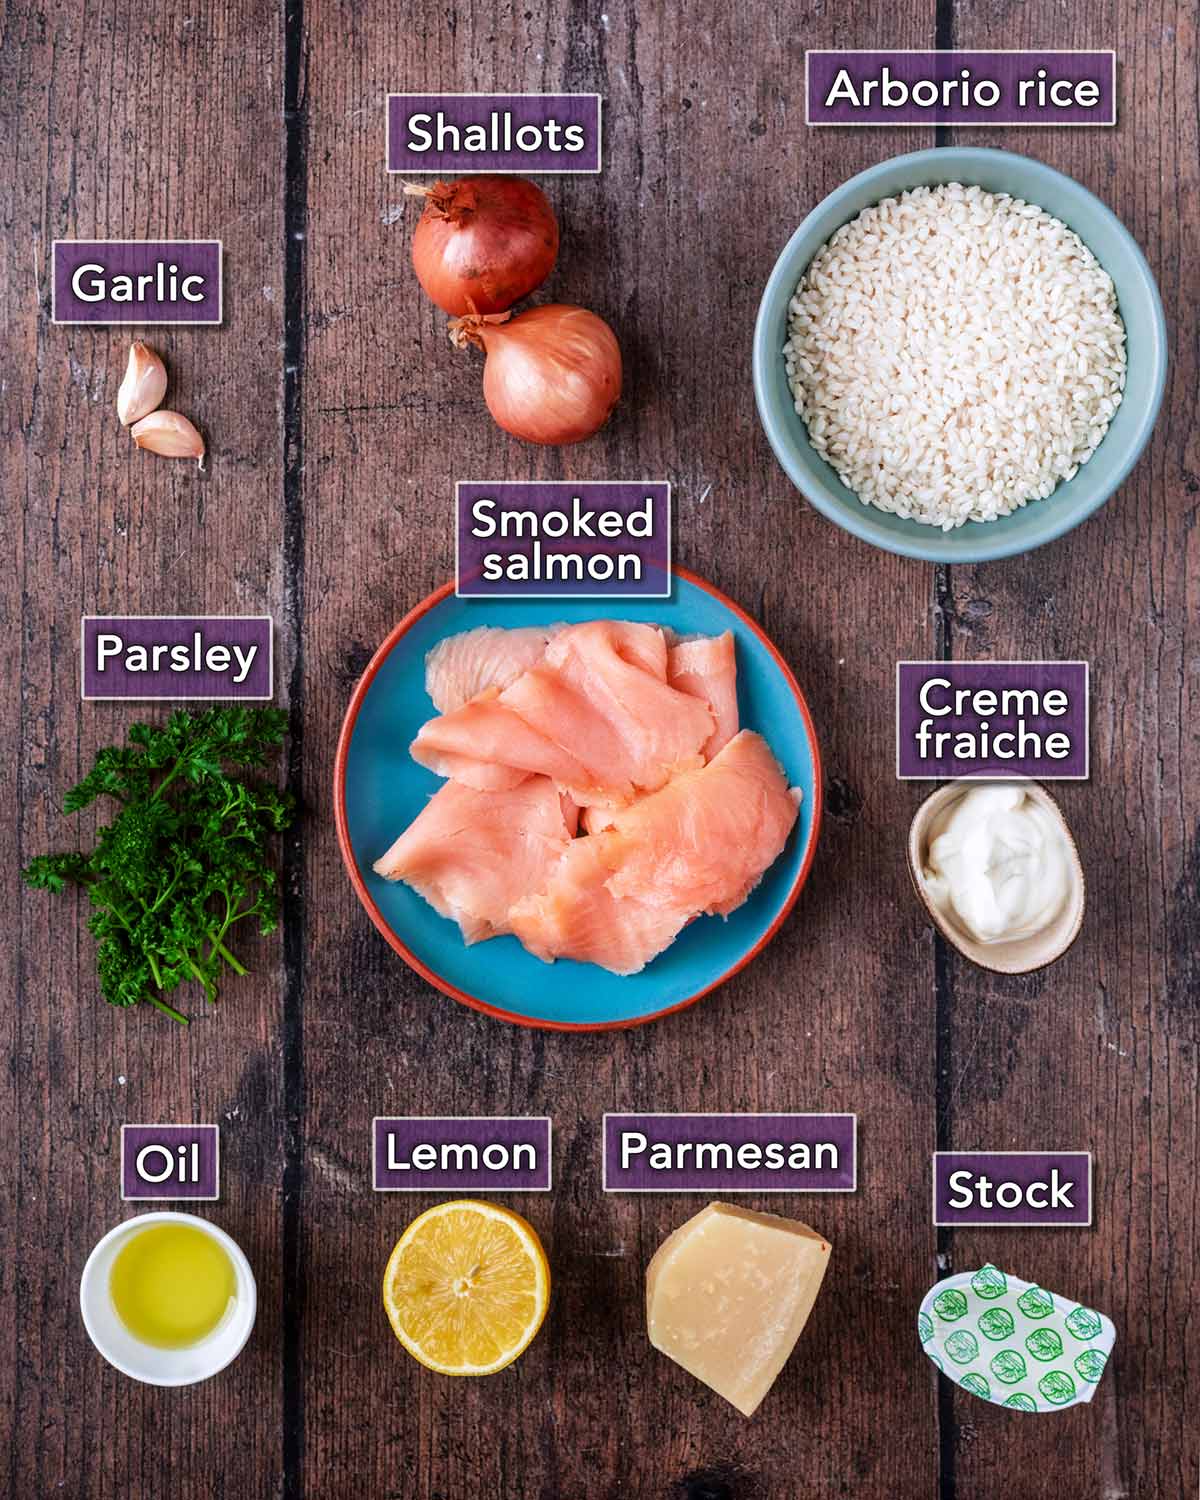 All the ingredients needed for this recipe, each with a text overlay label.